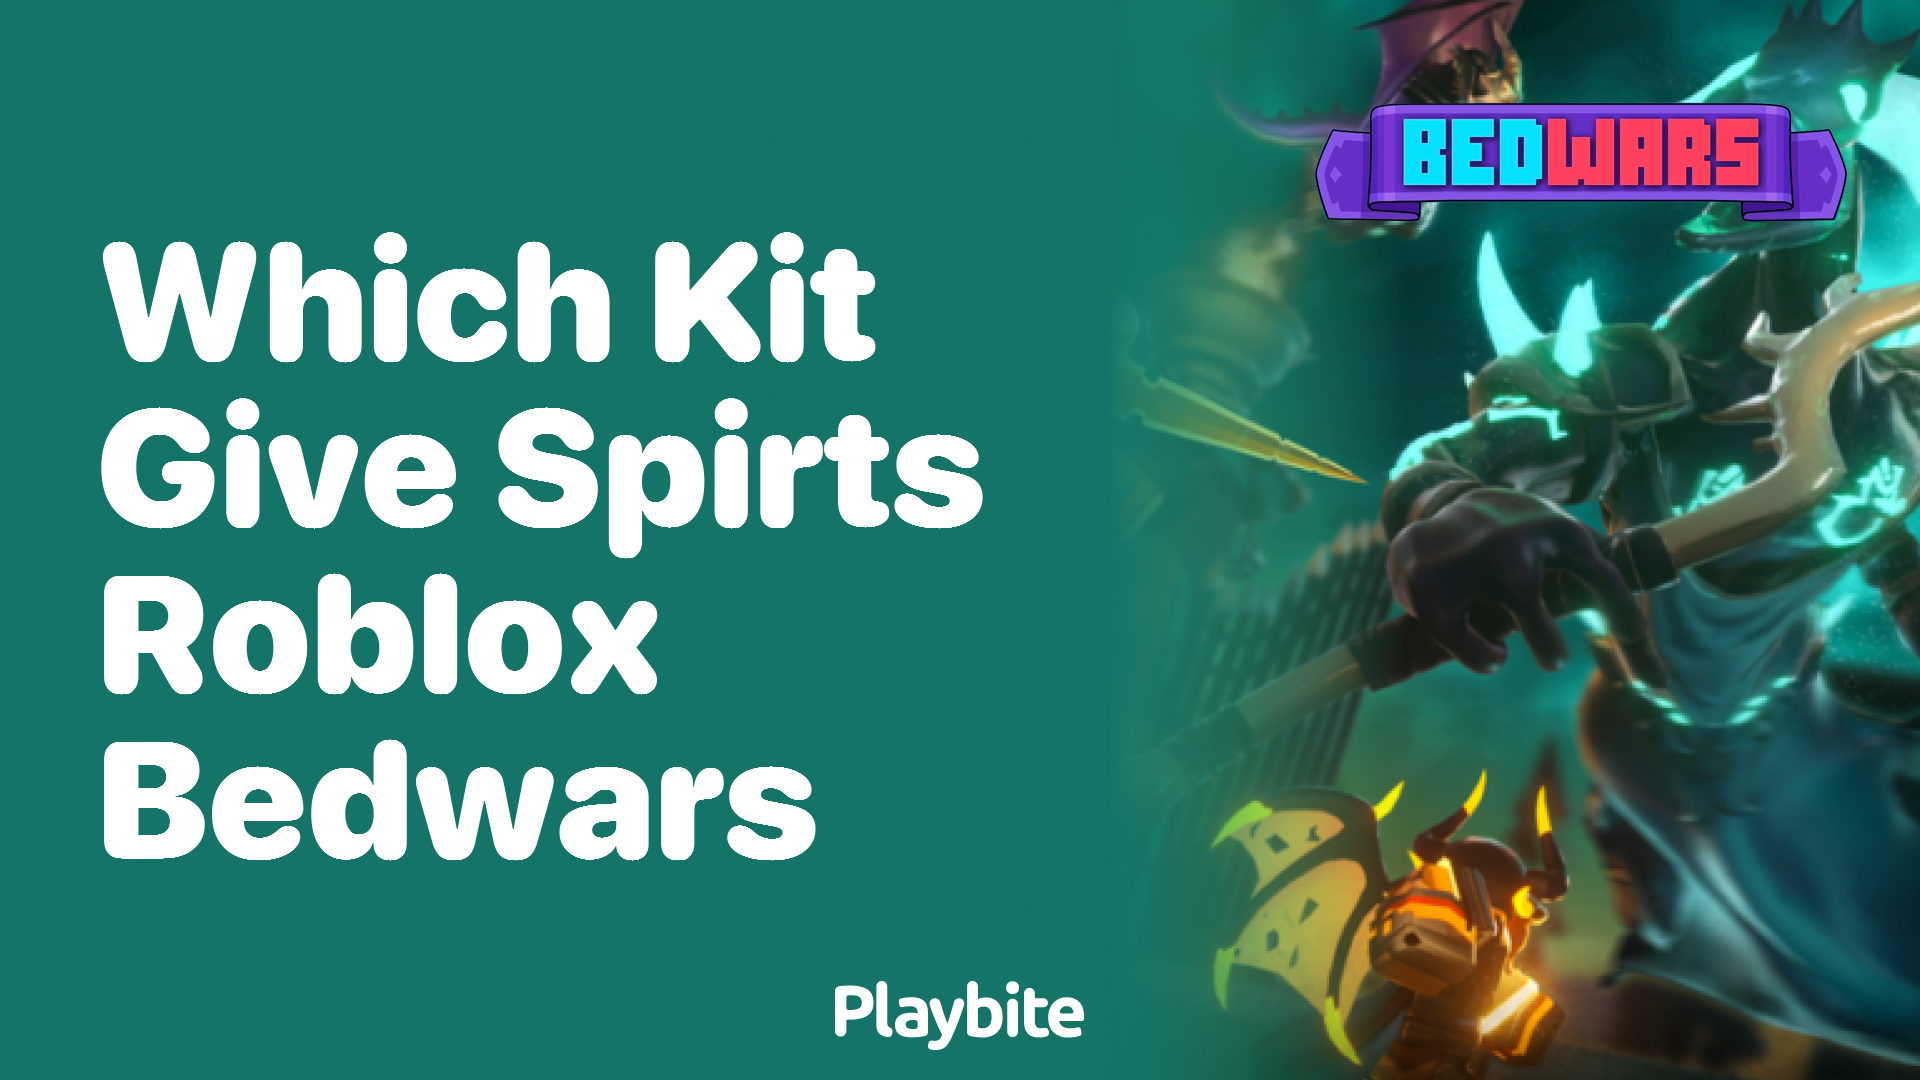 Discover Which Kit Gives Spirits in Roblox Bedwars